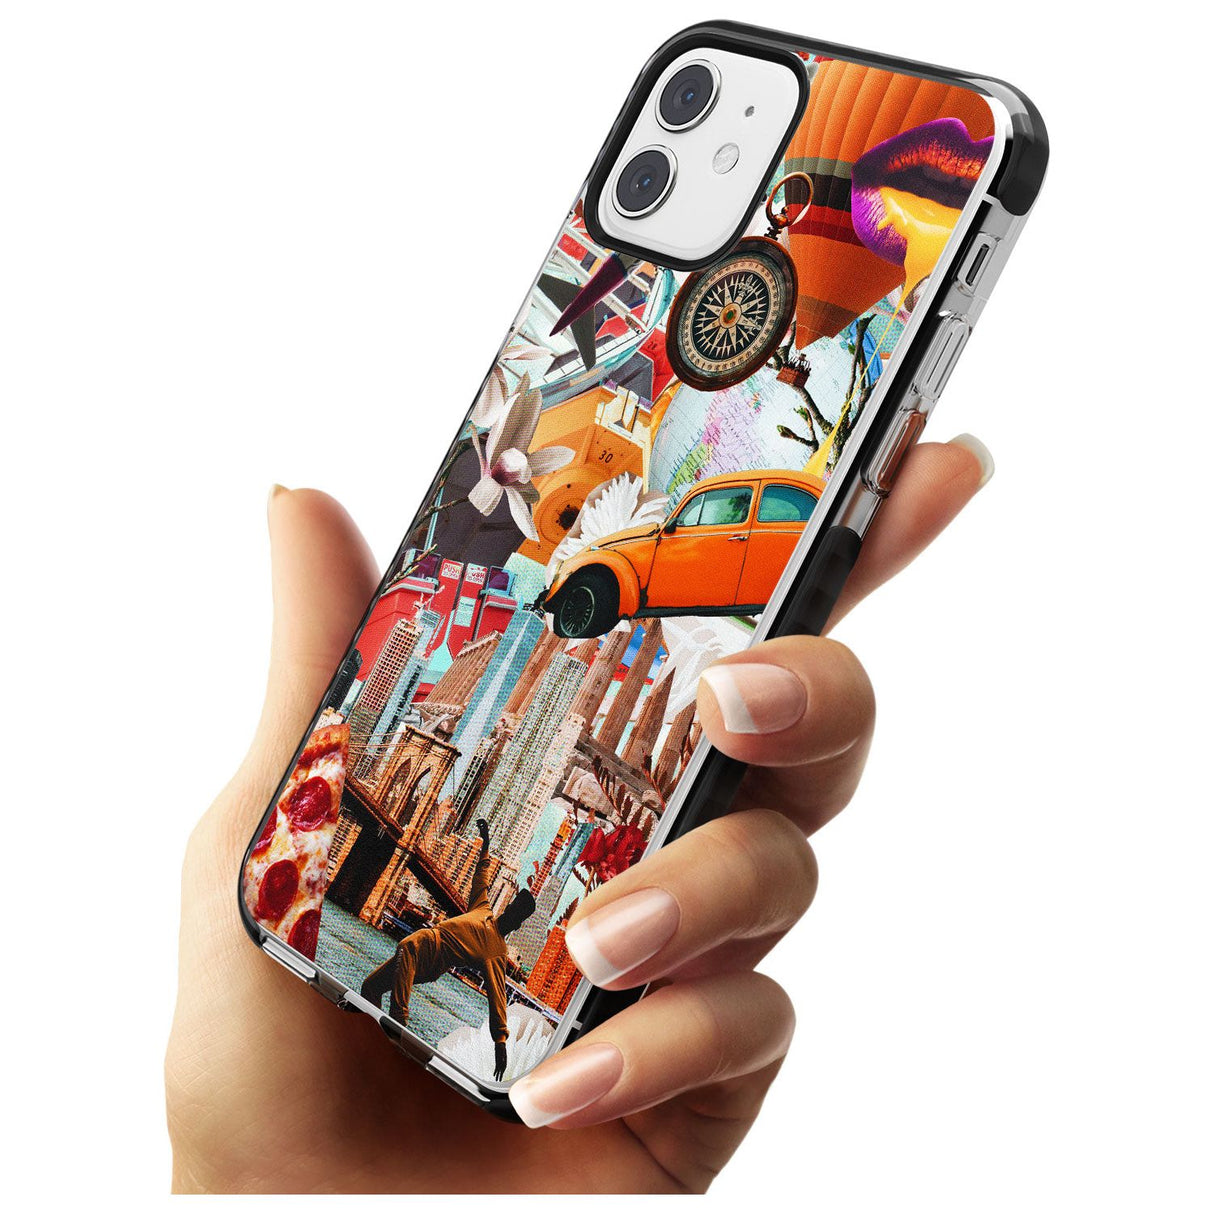 Vintage Collage: New York Mix Black Impact Phone Case for iPhone 11